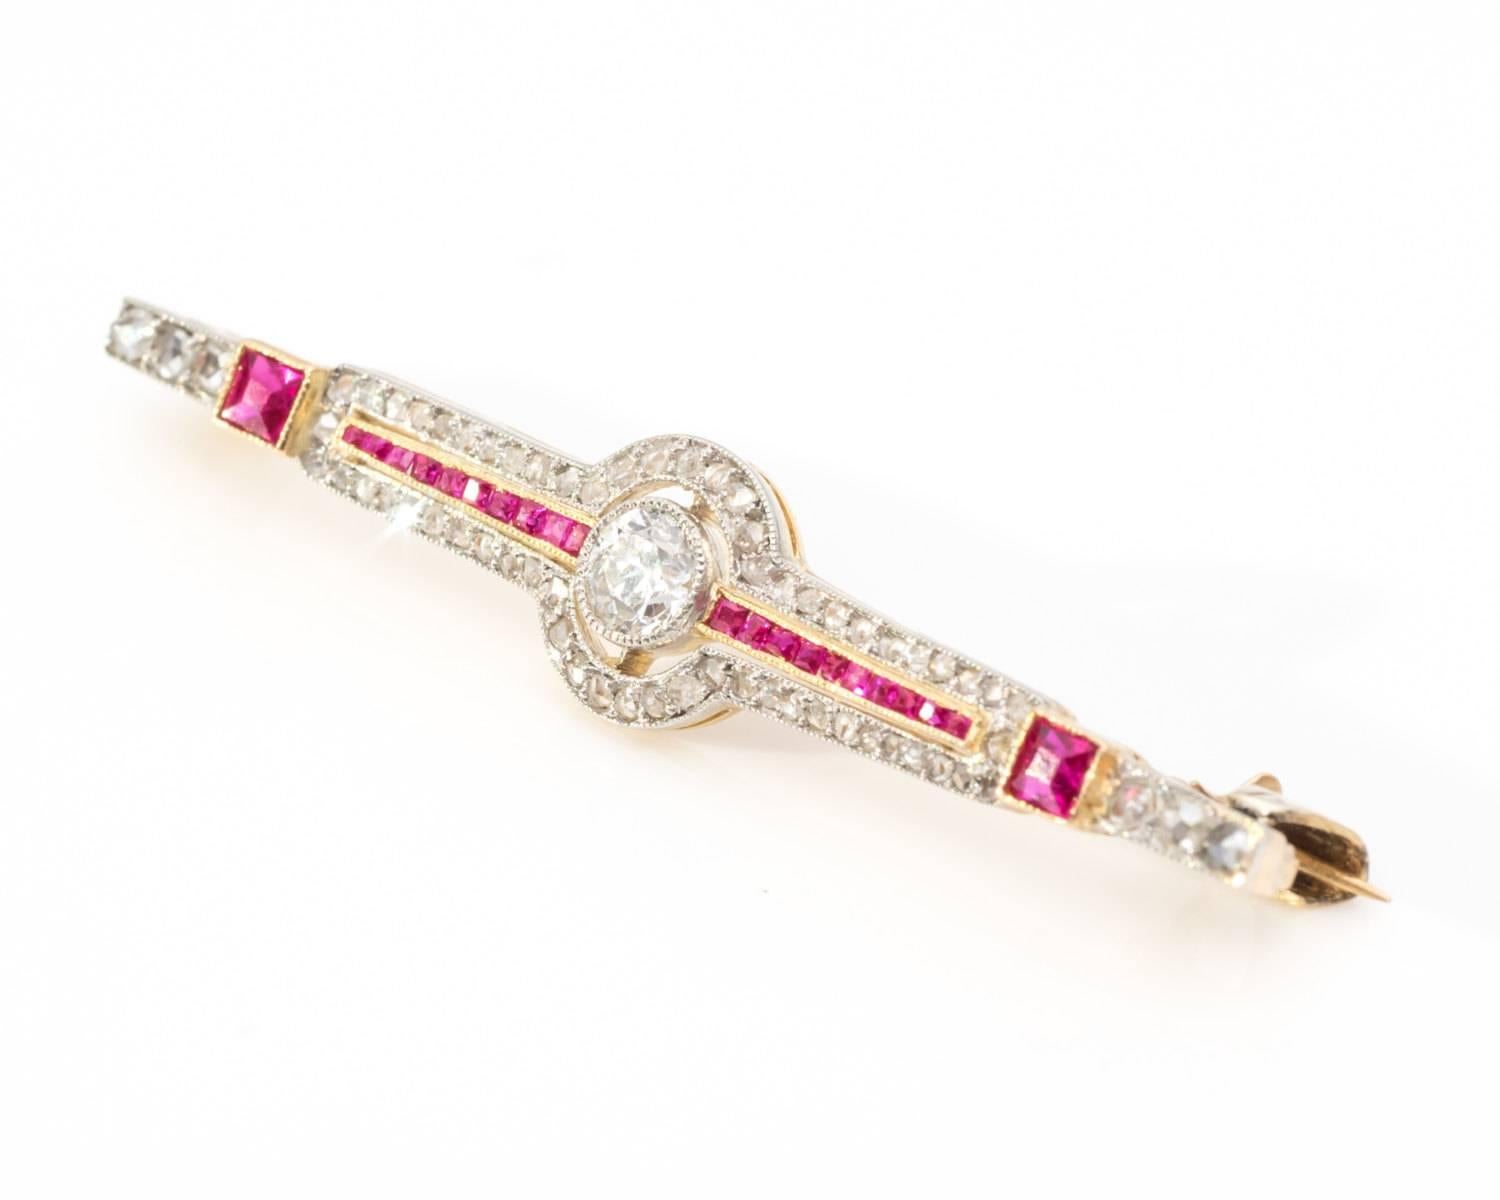 Rare brooch / pin from 1890s, exquisite condition
Crafted in 14 Karat Yellow and White Gold
Features Natural Diamonds and French-Cut Rubies
Center Diamond - old mine cut, 0.25 carat total weight
French Cut Rubies as accent stones
All set in